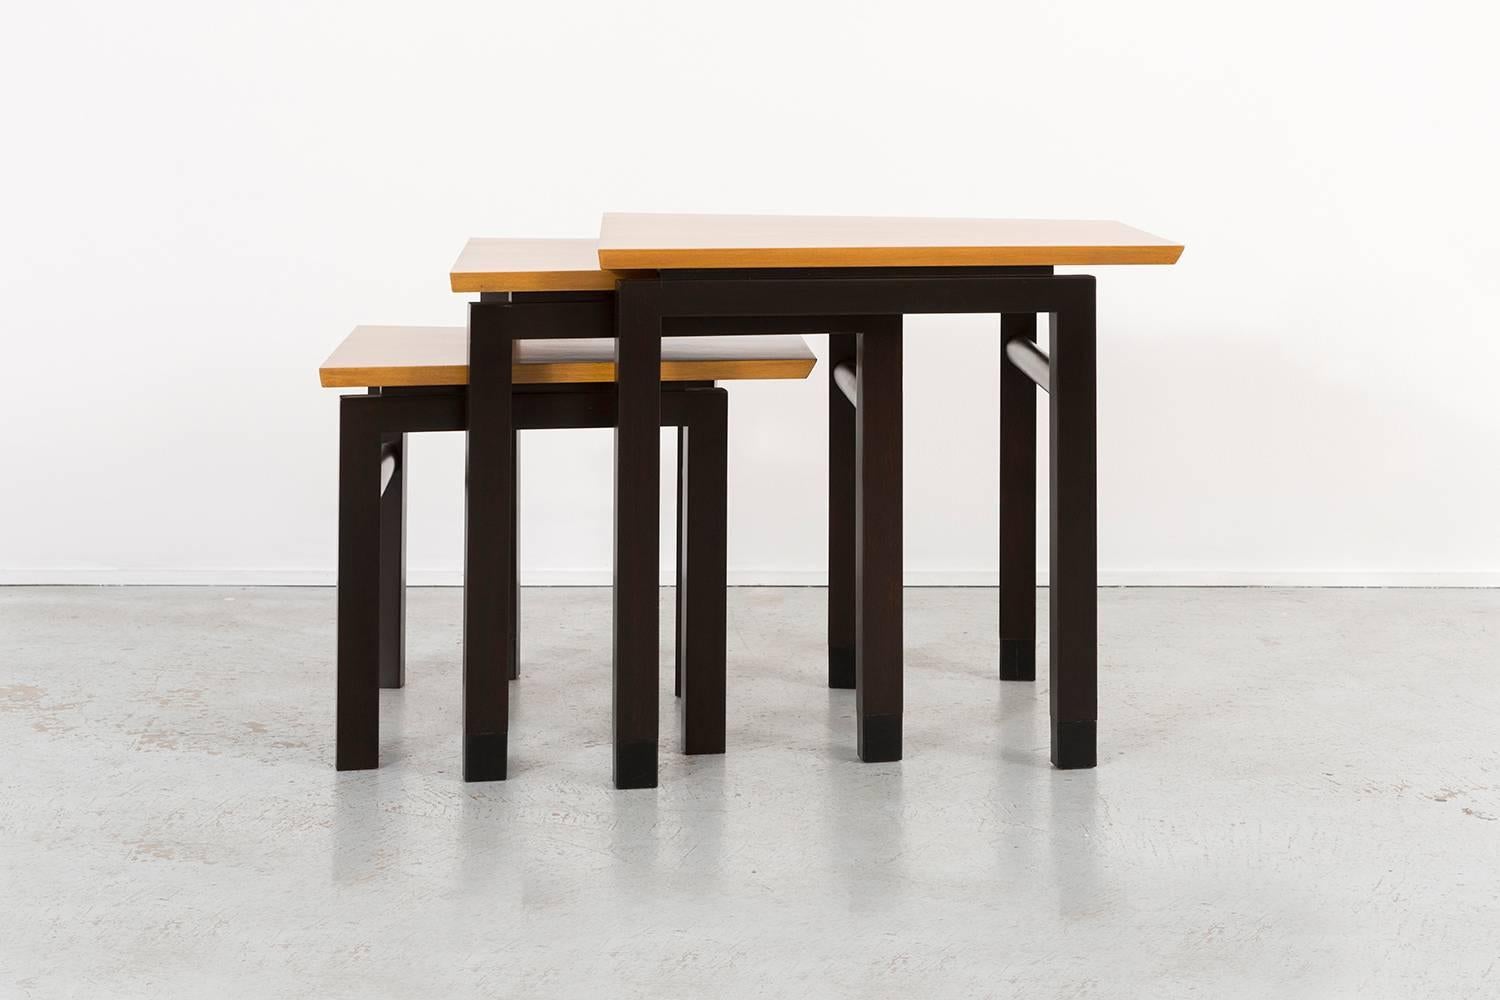 Nesting tables

Designed by Edward Wormley for Dunbar

USA, circa 1950s

Refinished mahogany and walnut

Largest table 22” H x 26 1/16” W x 25 1/8” D
Medium table 21” H x 22 5/16” W x 23 1/16” D
Smallest table 16 15/16” H x 18 ¾” W x 21